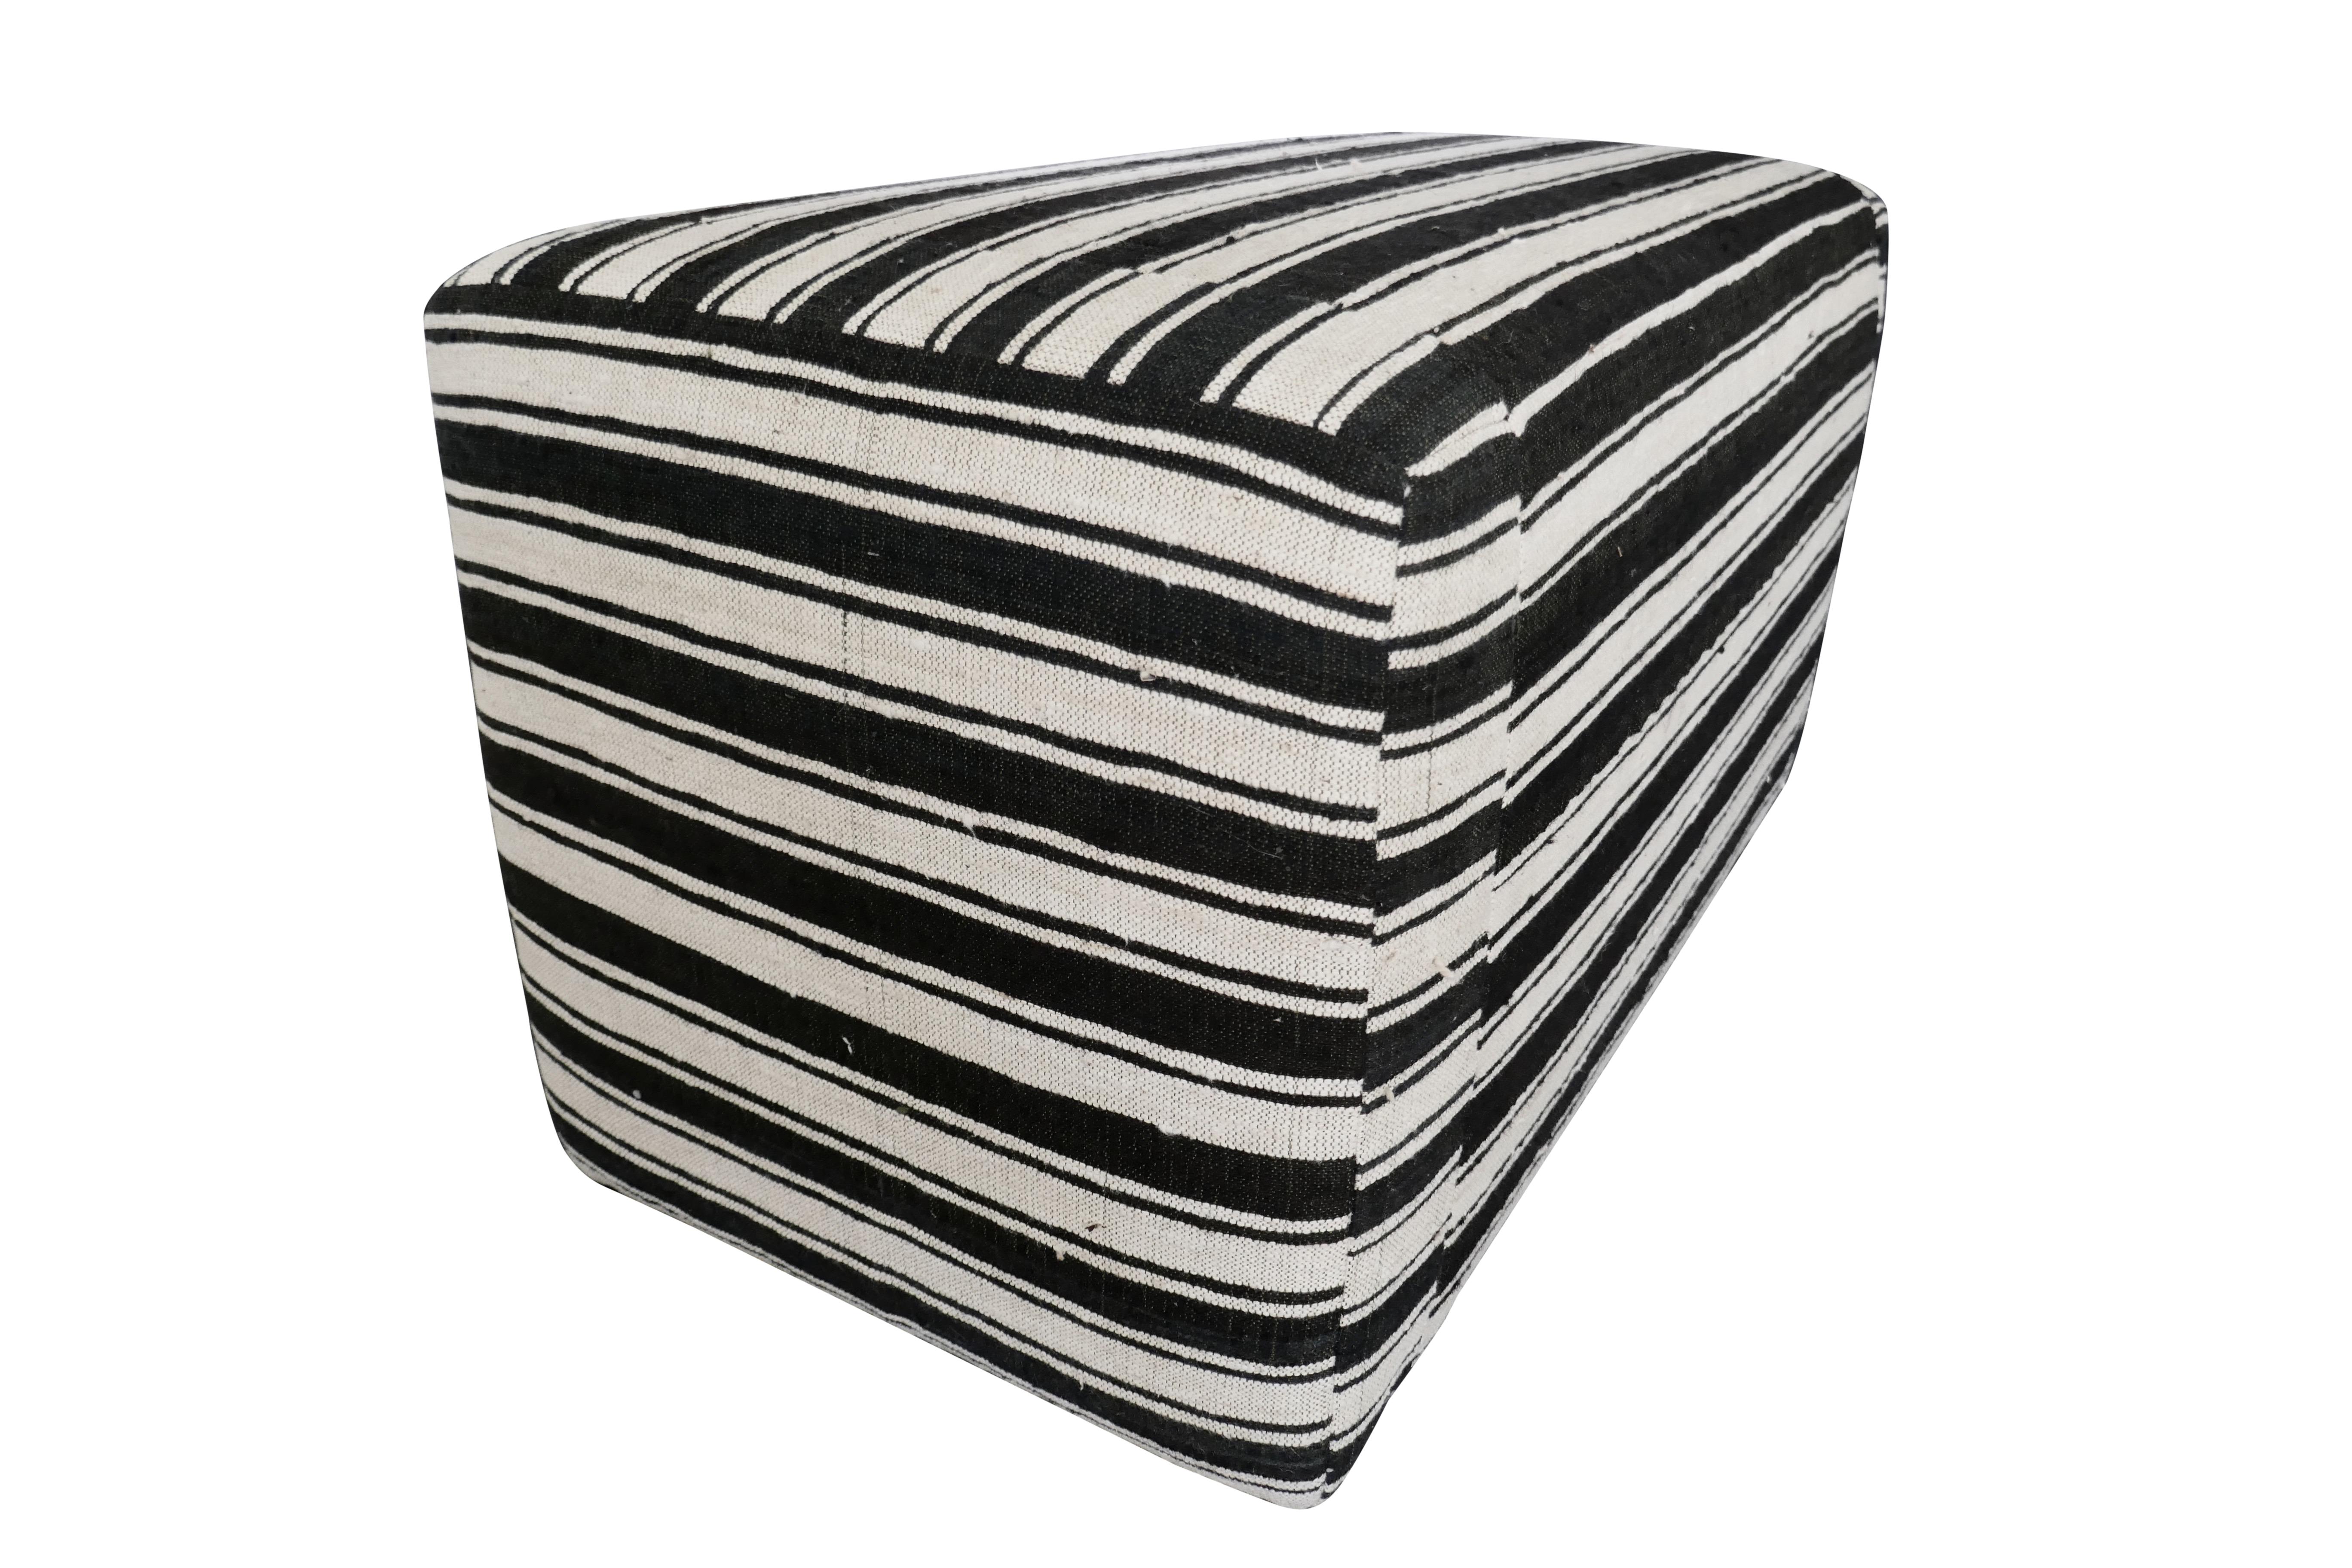 One-of-a-Kind!
FI custom block style accent ottoman/bench. Perfectly upholstered in outstanding authentic vintage hand-woven heavy textural Berber Kilim pure wool in fabulous variegated black & natural offset striping. A beautiful and versatile